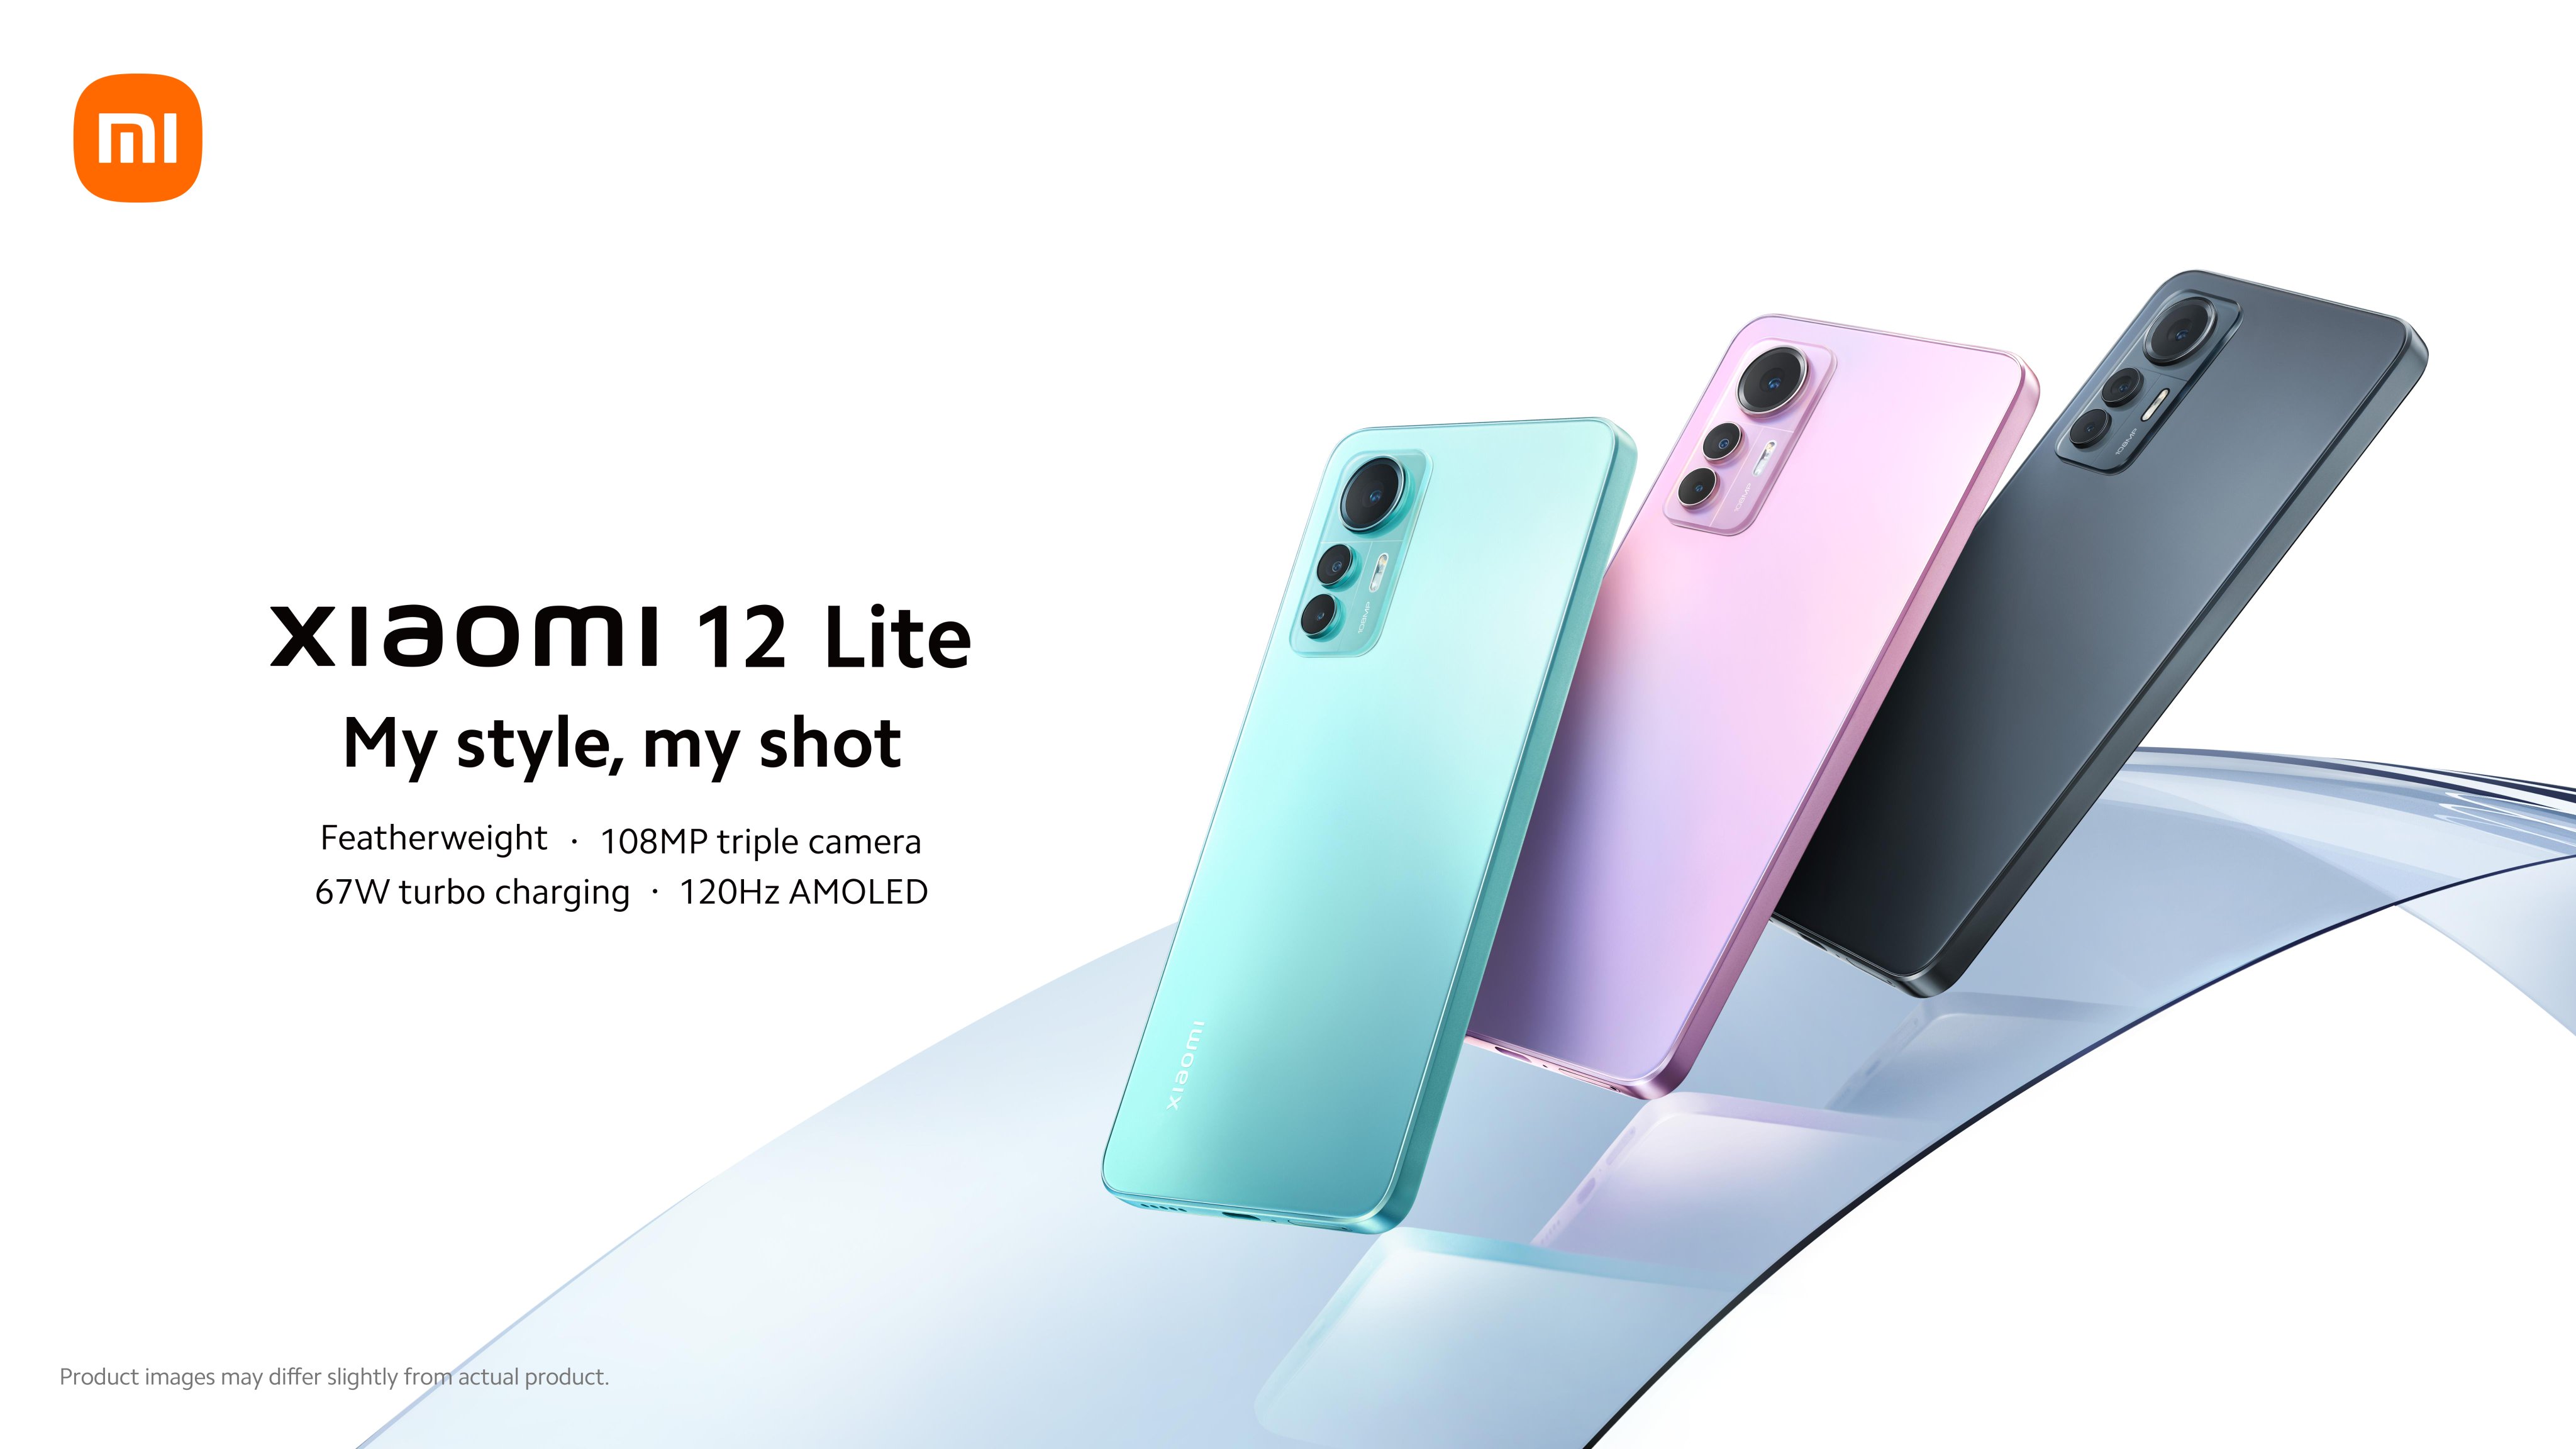 Xiaomi 12 Lite: AMOLED display at 120 Hz, 108 MP camera and Snapdragon 778G chip for $400